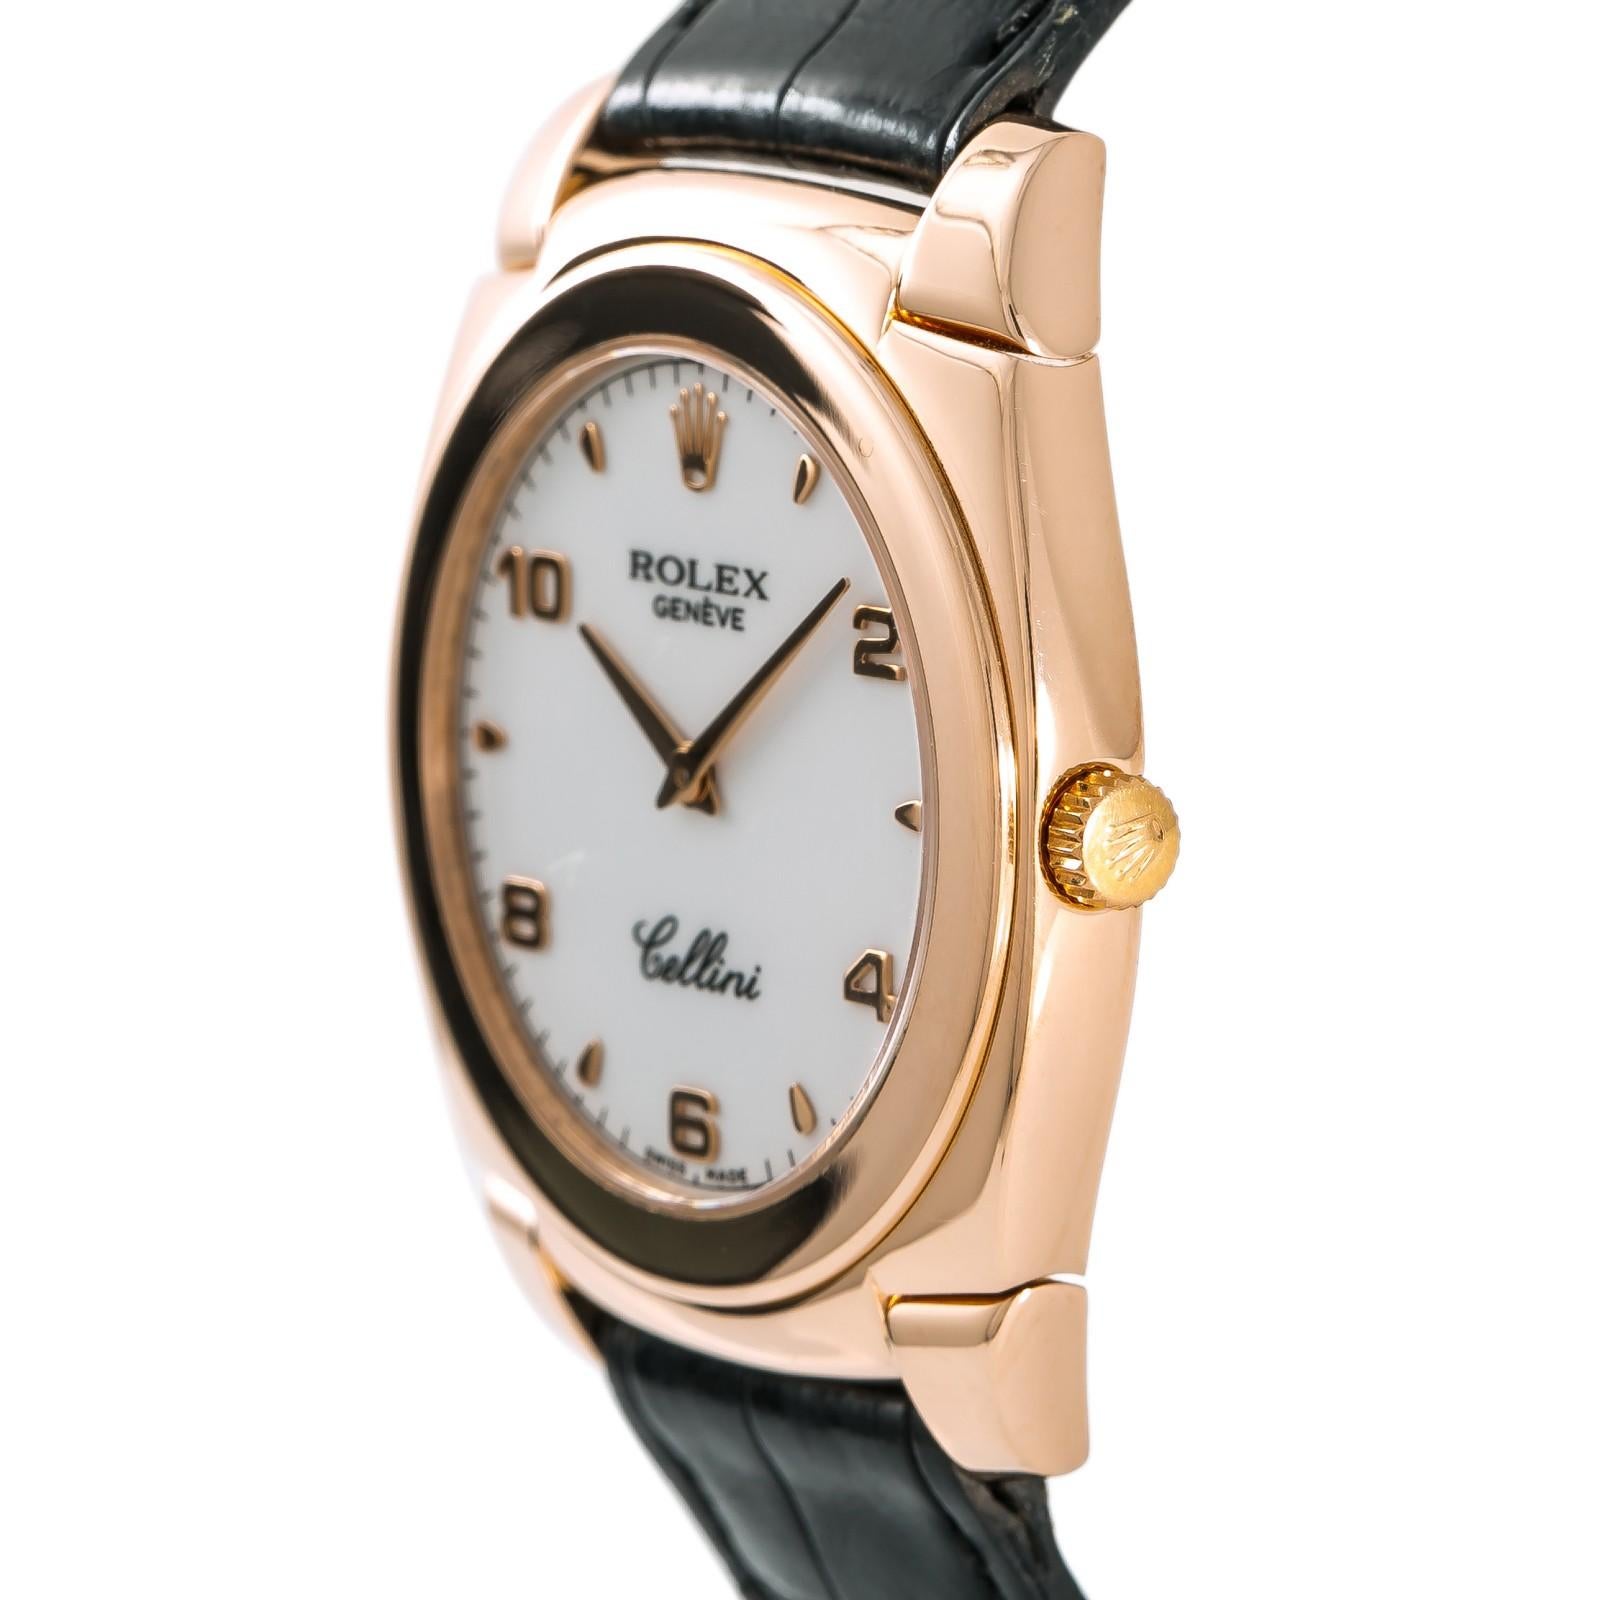 Rolex Cellini 5330, White Dial Certified Authentic For Sale 1